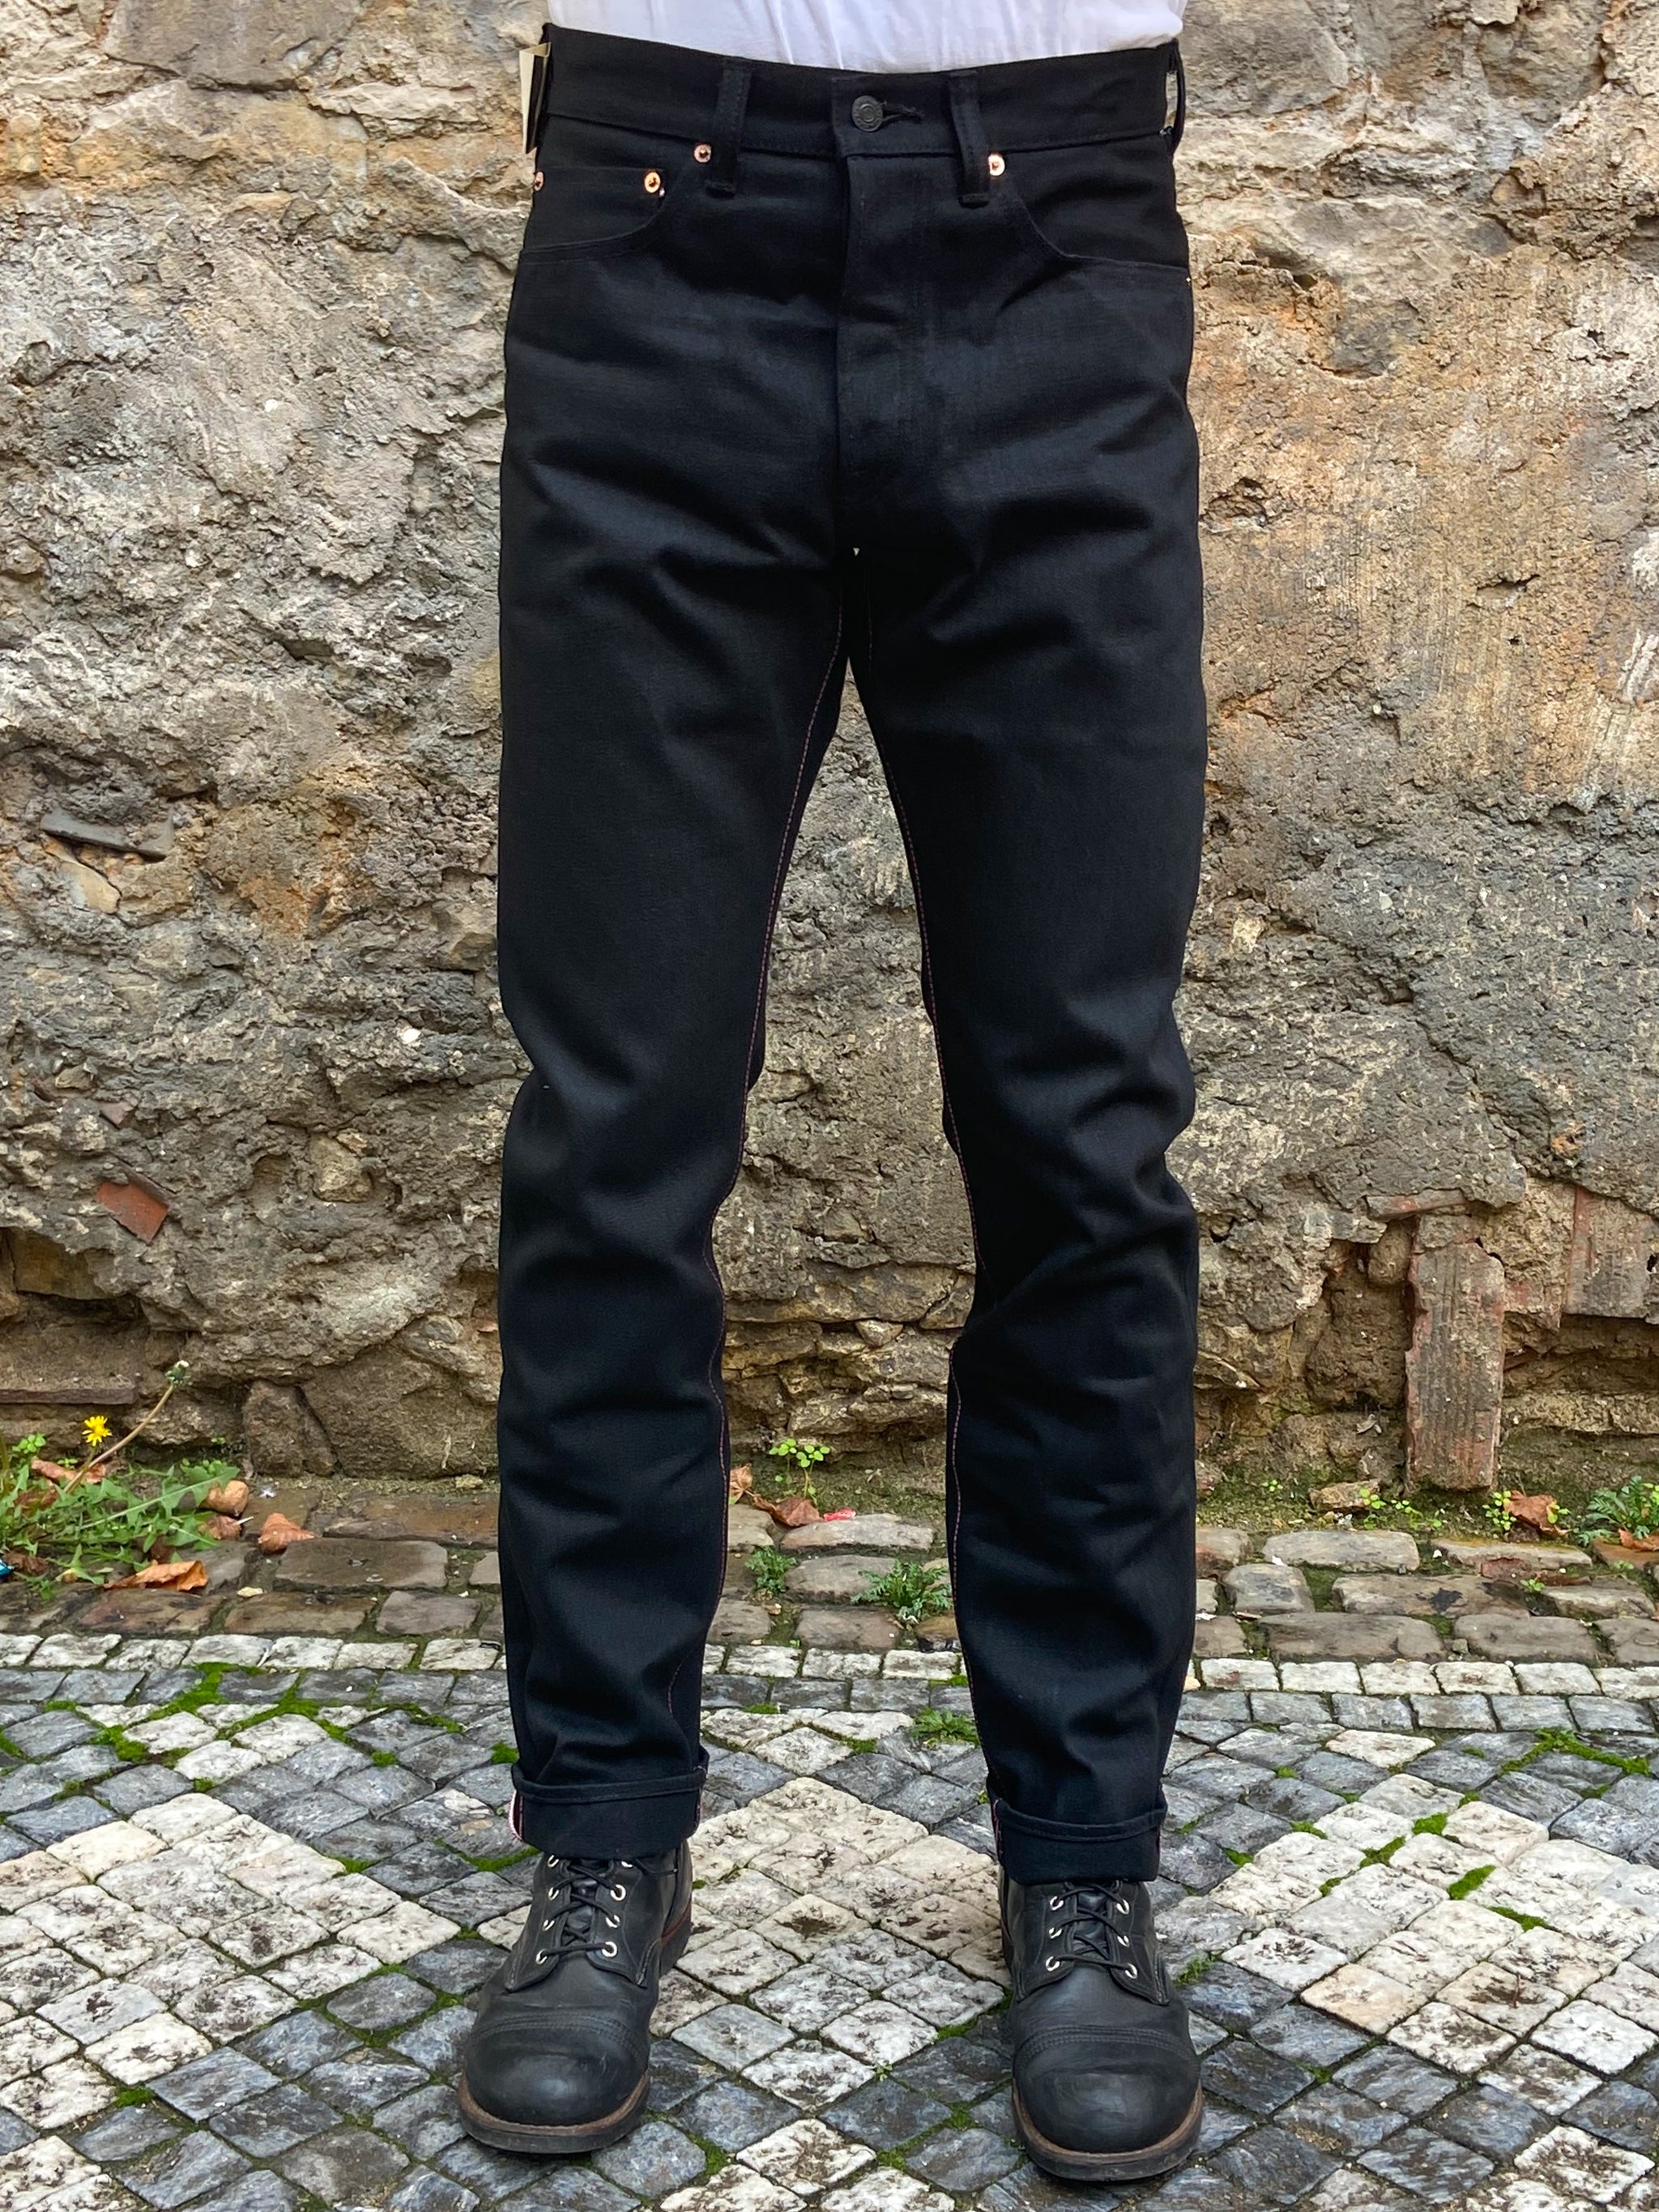 Arriving this Friday on Tate  Yoko is the All Natural Organic Cotton  Selvedge This denim is a 14oz undyed Japanese selvedge denim made  Tate   Yoko tateandyoko on Instagram